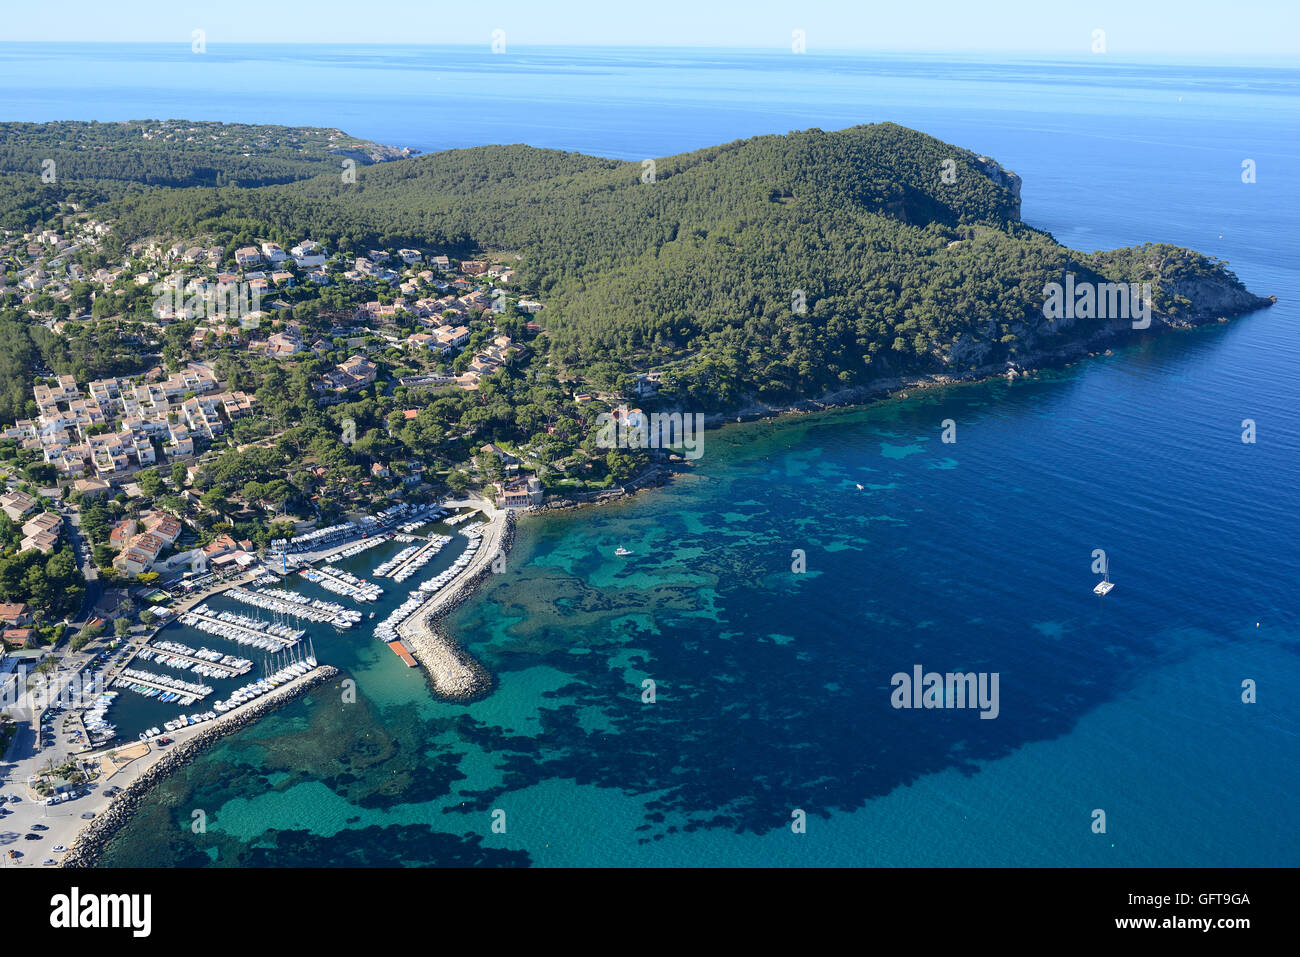 AERIAL VIEW. The small Marina of La Madrague with the picturesque seaside forest of Bay des Lecques. Saint-Cyr-sur-Mer, Var, Provence, France. Stock Photo